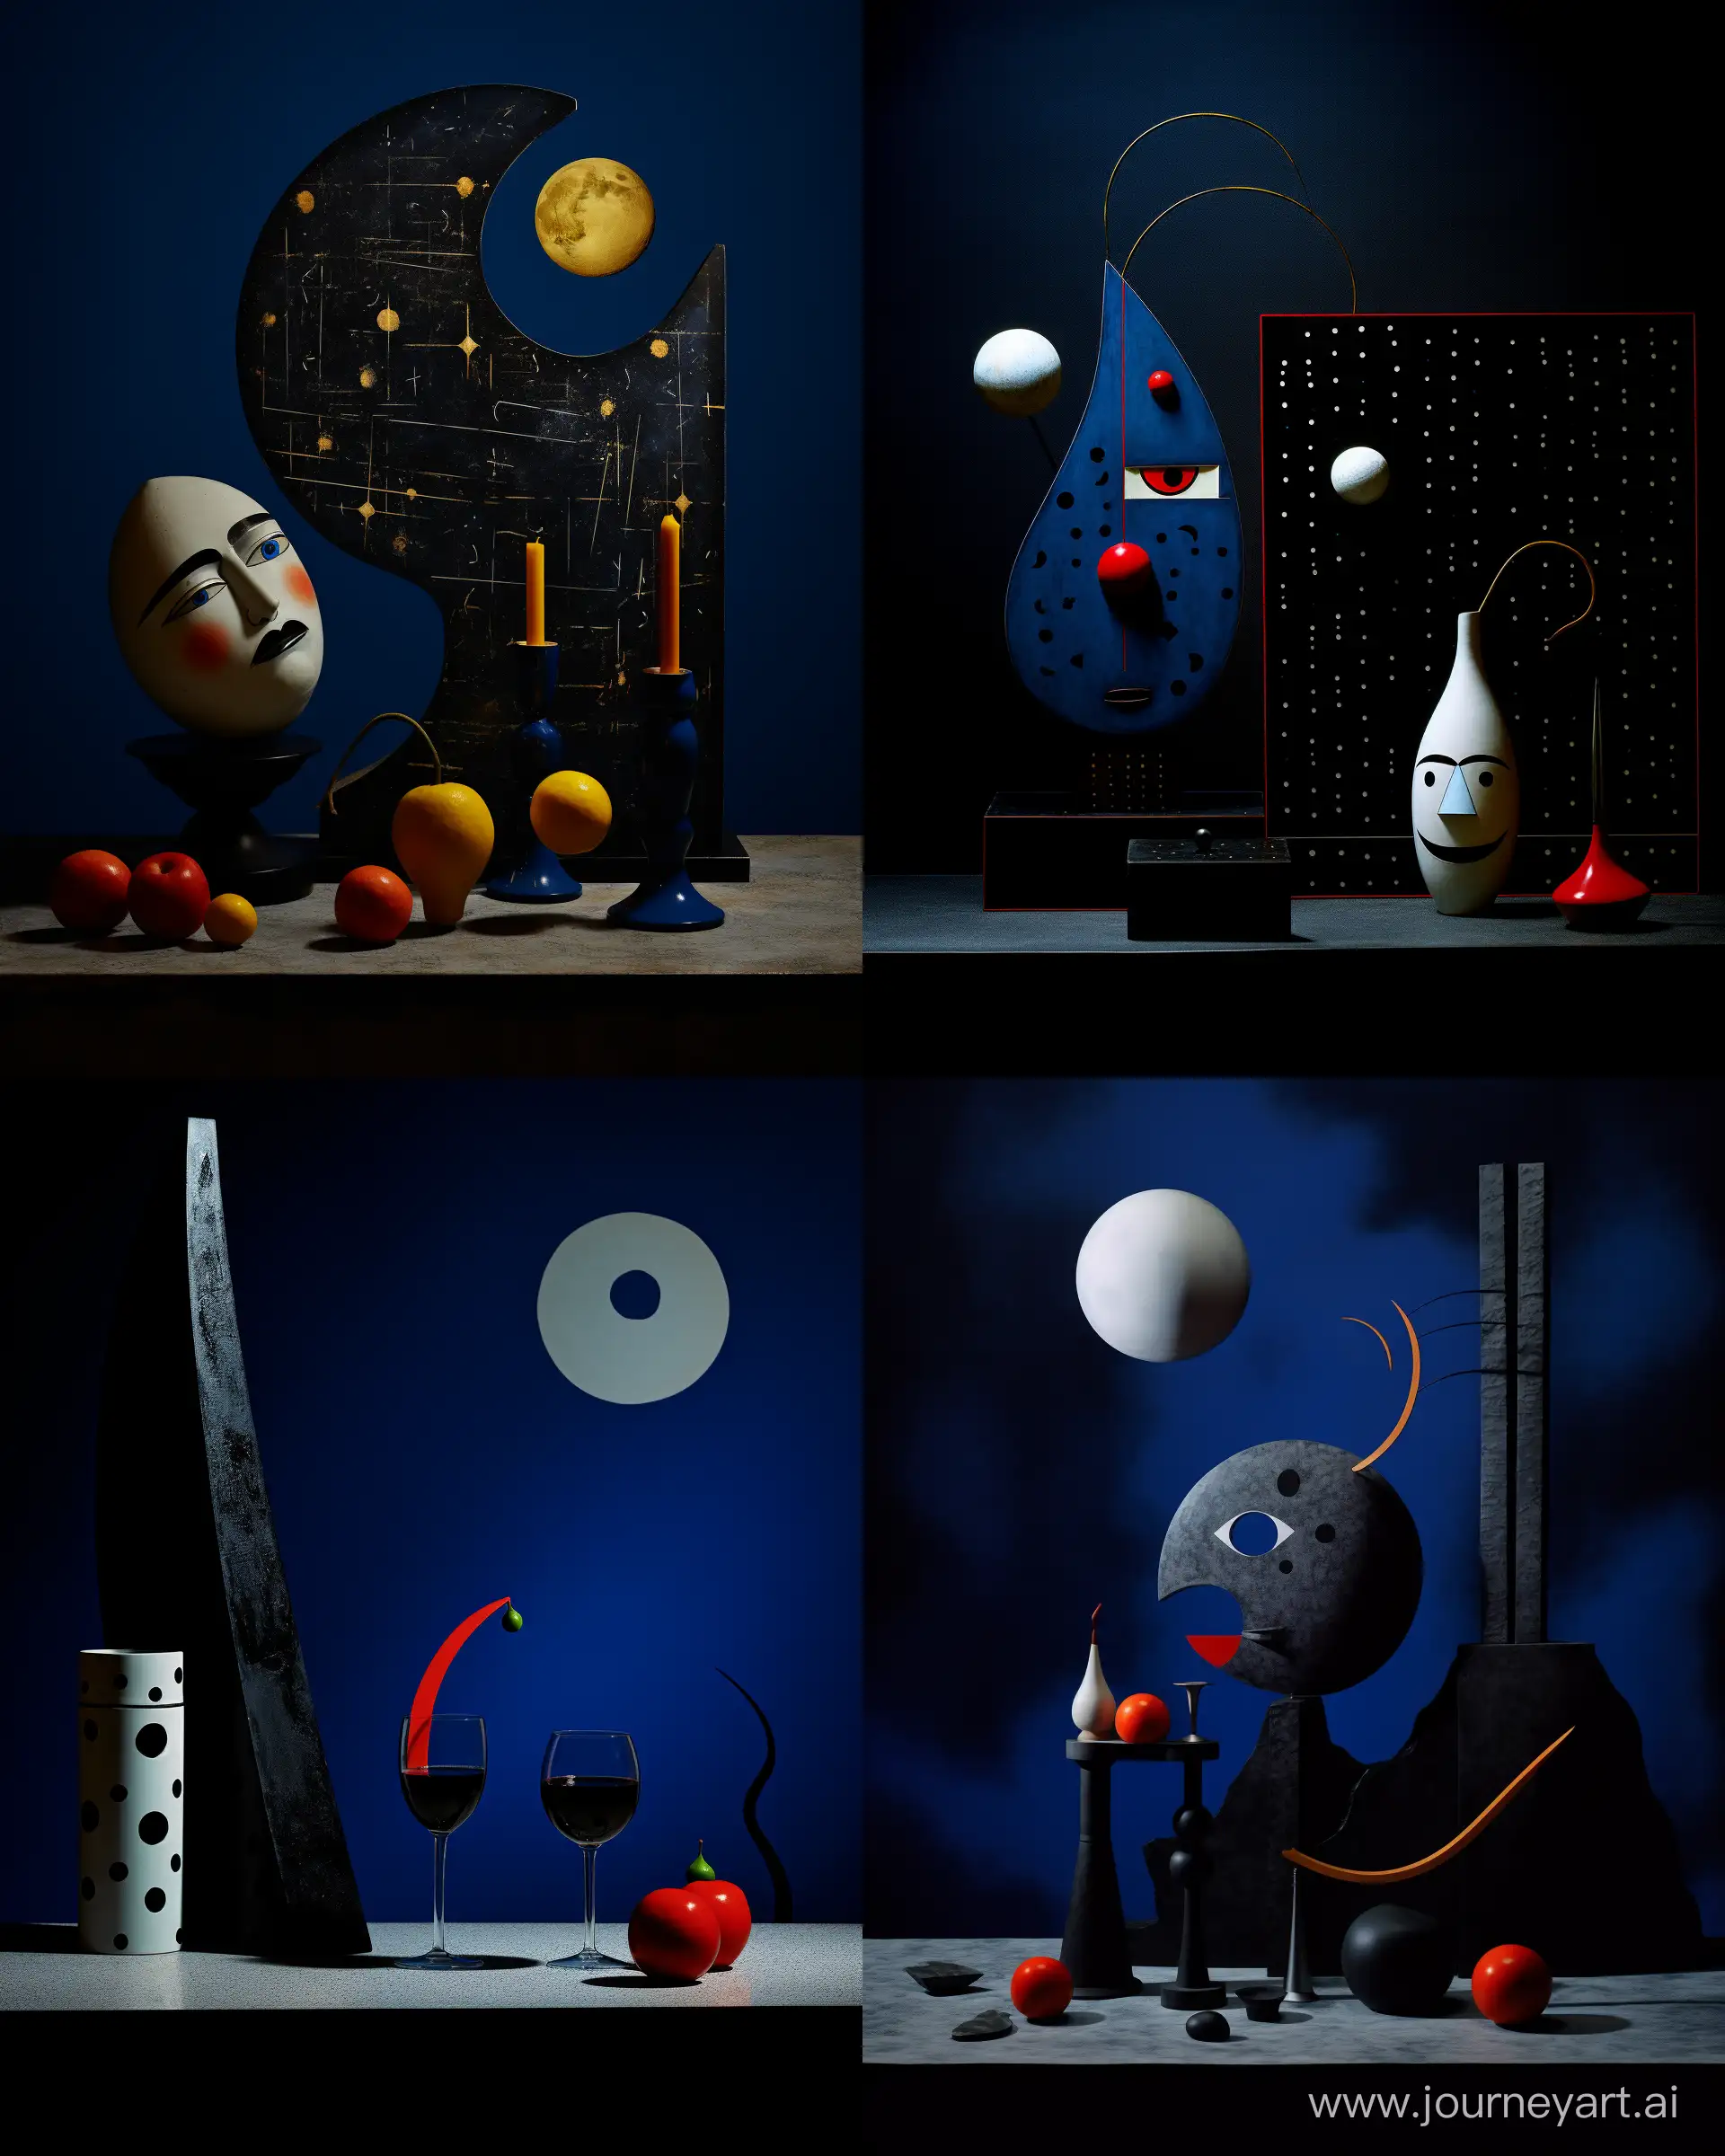 Artistic-Still-Life-Photography-by-Joan-Miro-with-Dark-Blue-Atmosphere